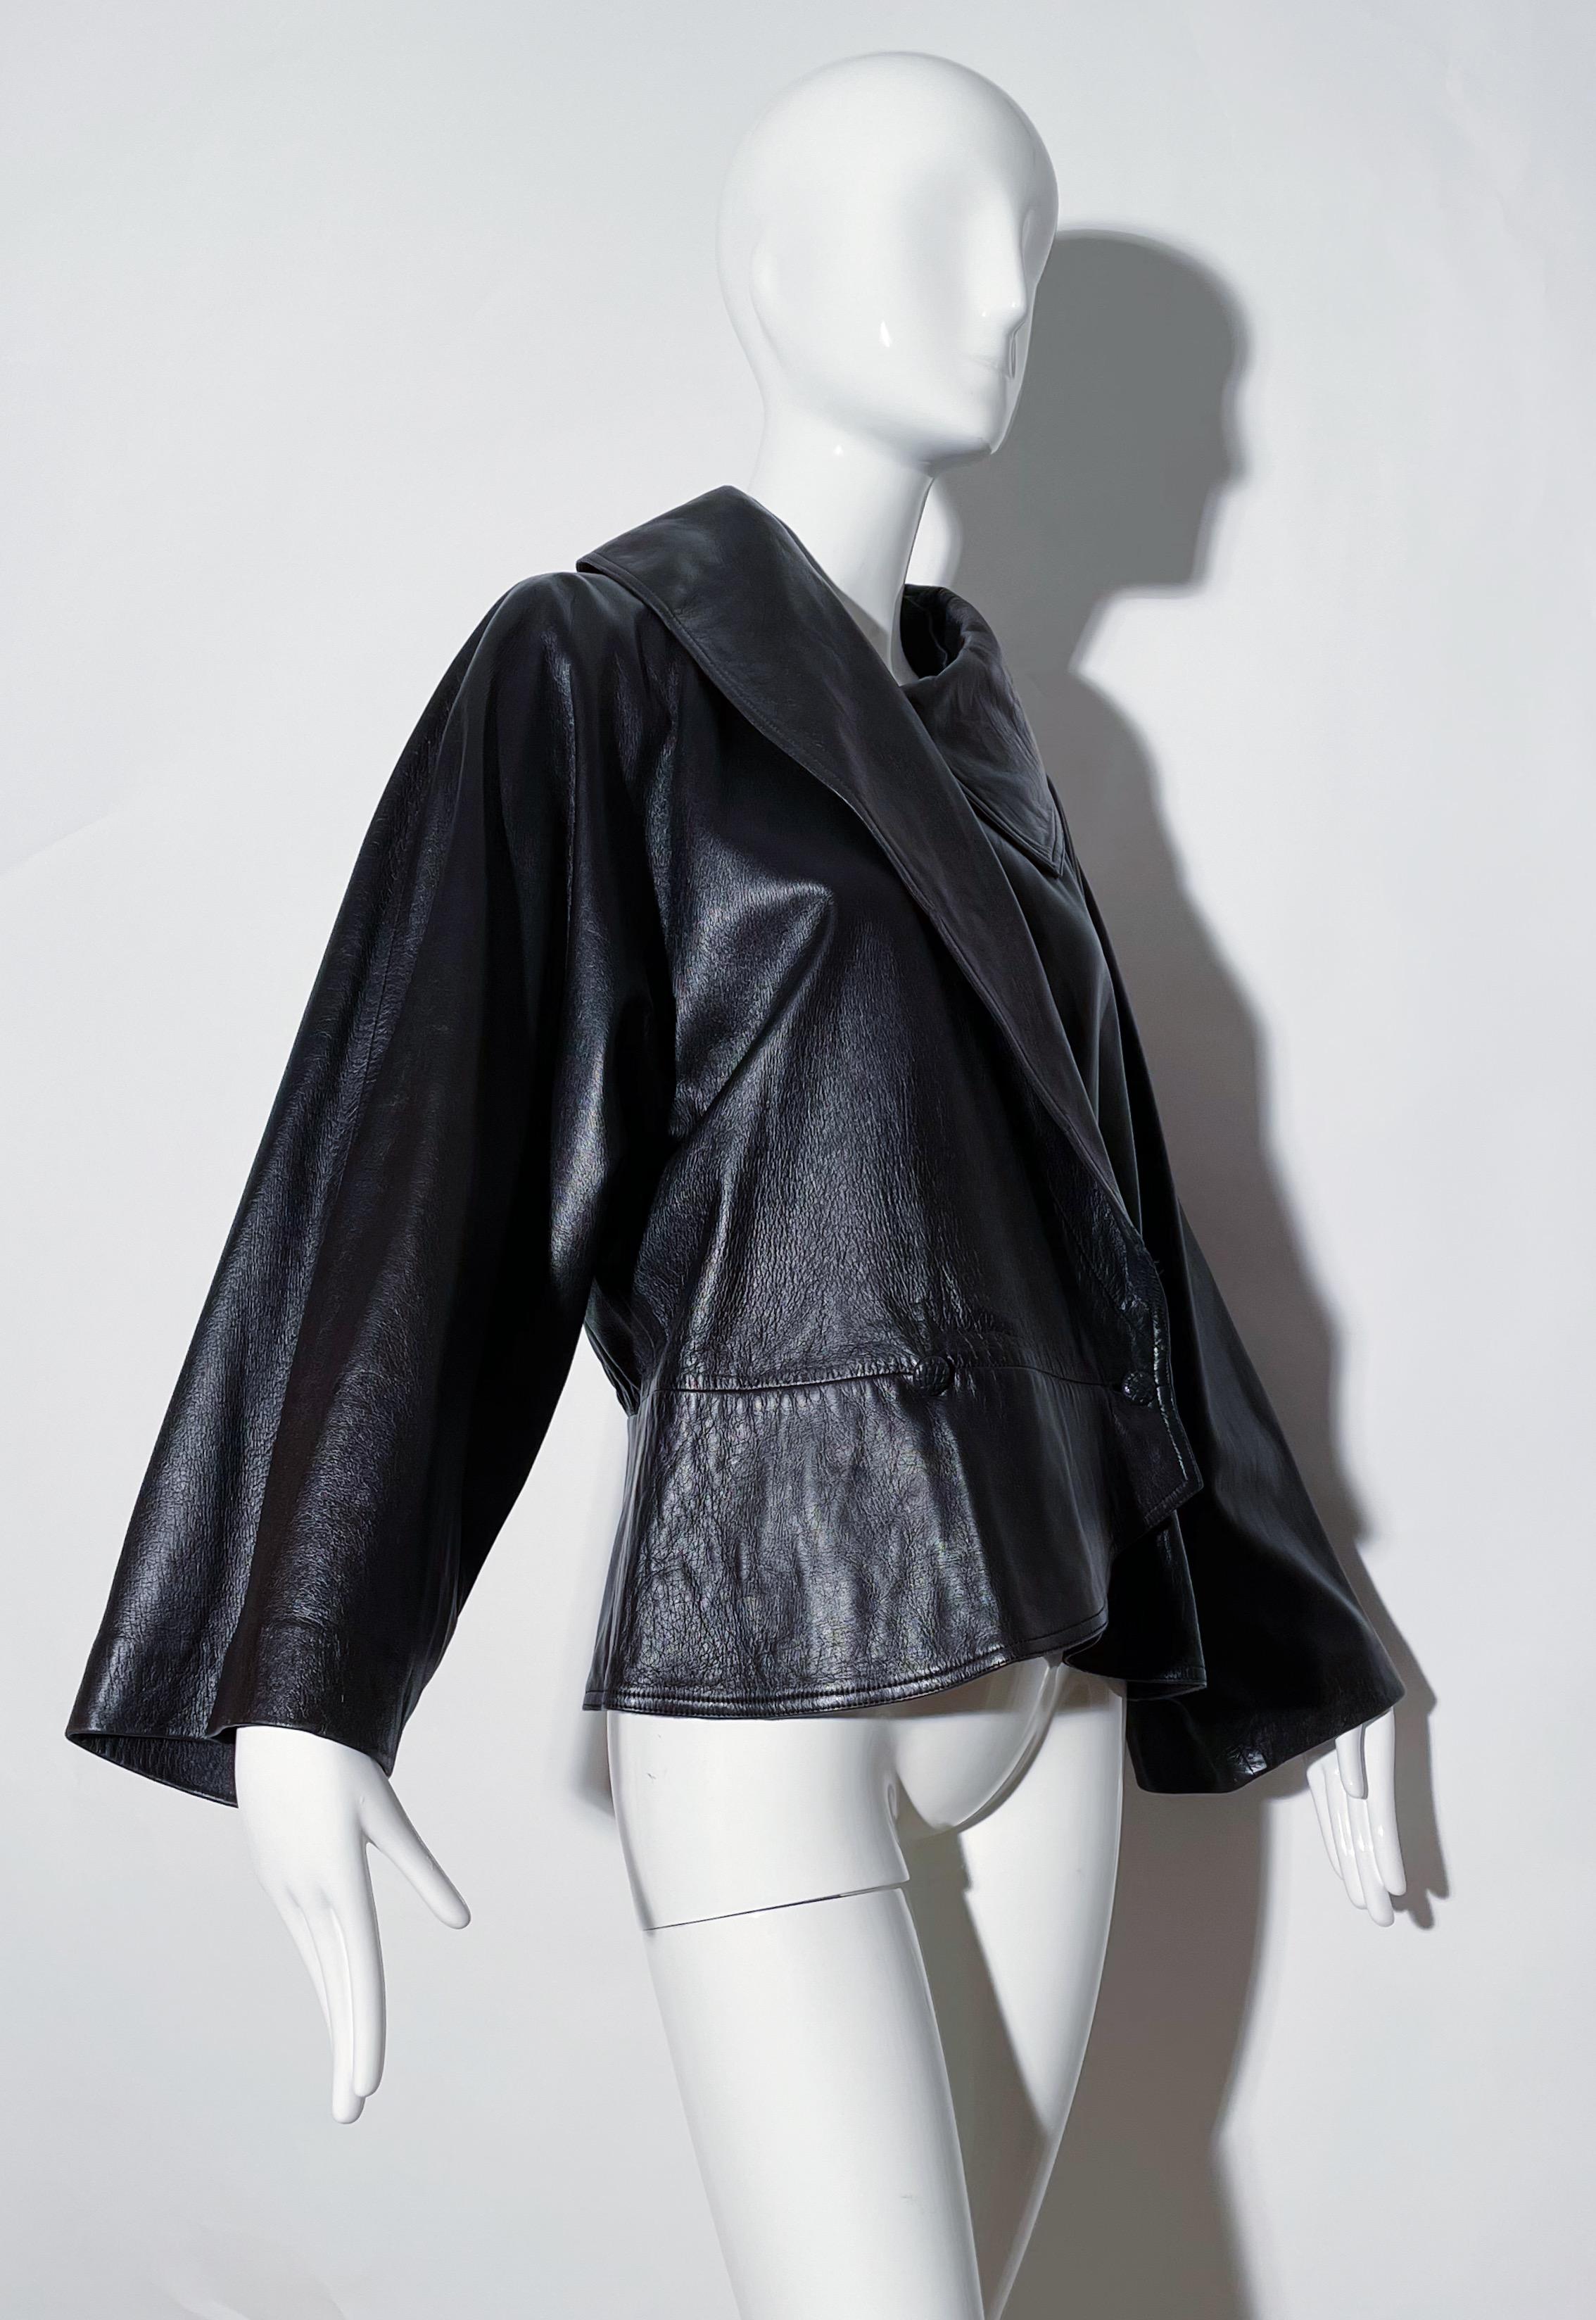 Mario Valentino Peplum Leather Jacket  In Good Condition For Sale In Los Angeles, CA